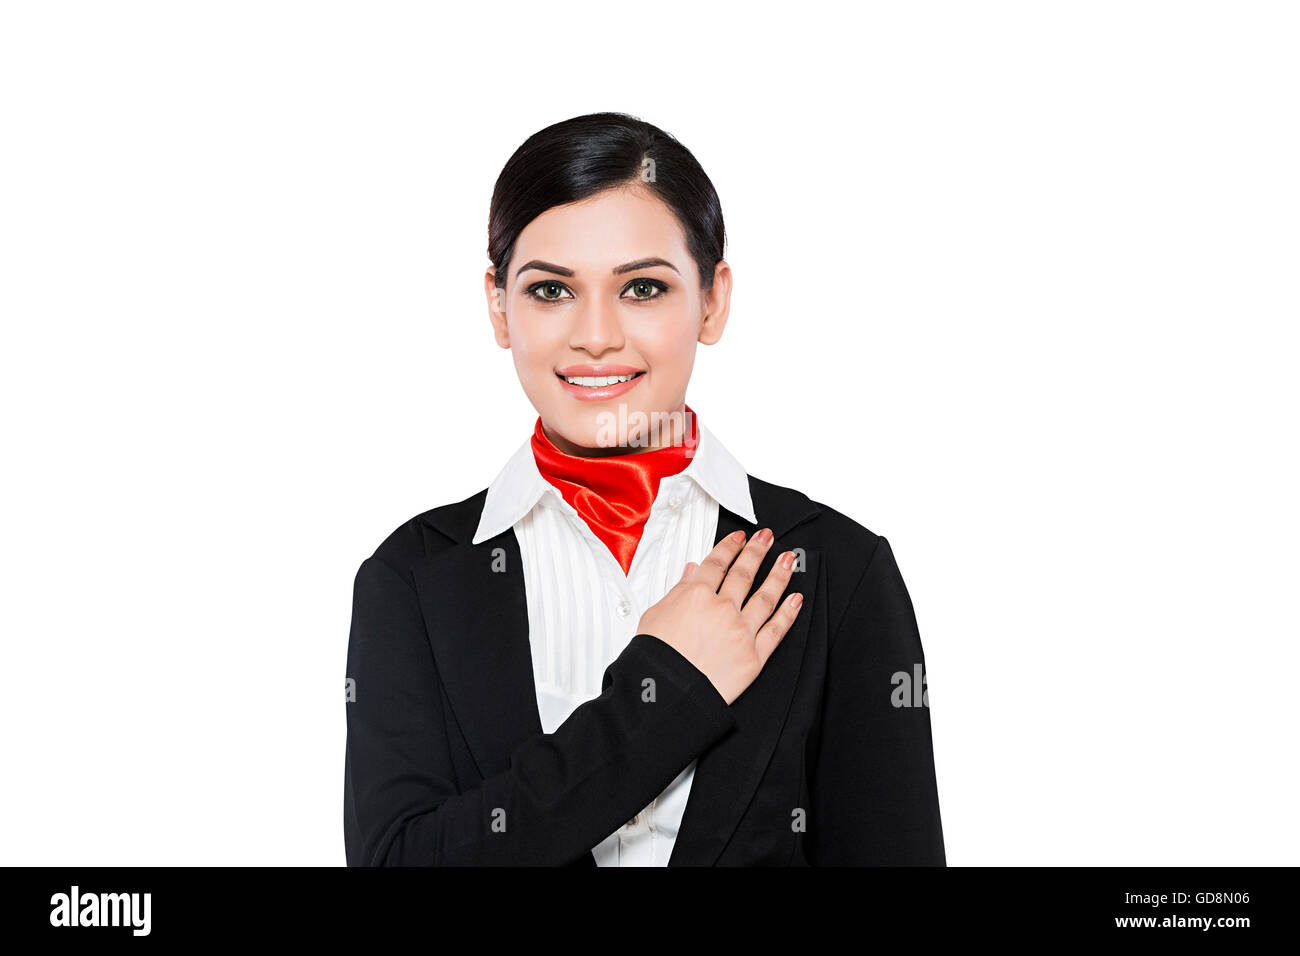 1 Indian Adult Woman Air Hostess Cabin Crew Obedience Stock Photo